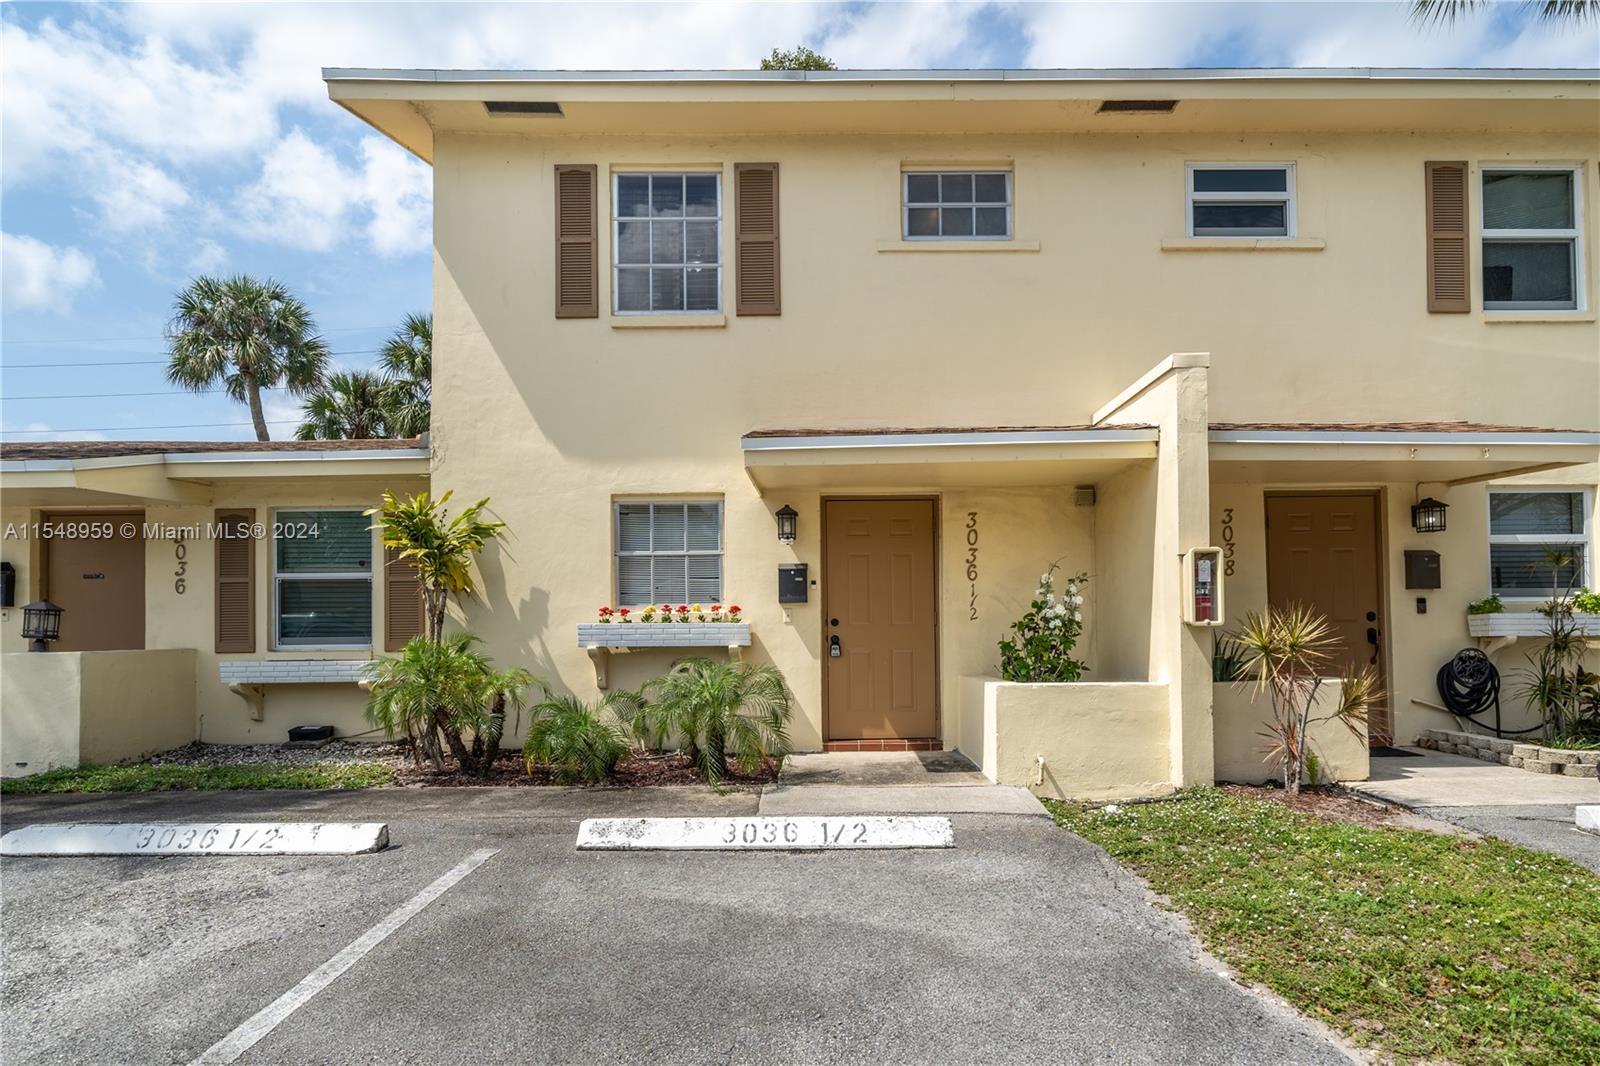 BEAUTIFUL 3 BEDROOMS AND 1 AND HALF BATHROOMS, TOWNHOUSE IN PALM AIRE.PRIVATE FENCE YARD 2 PARKING S